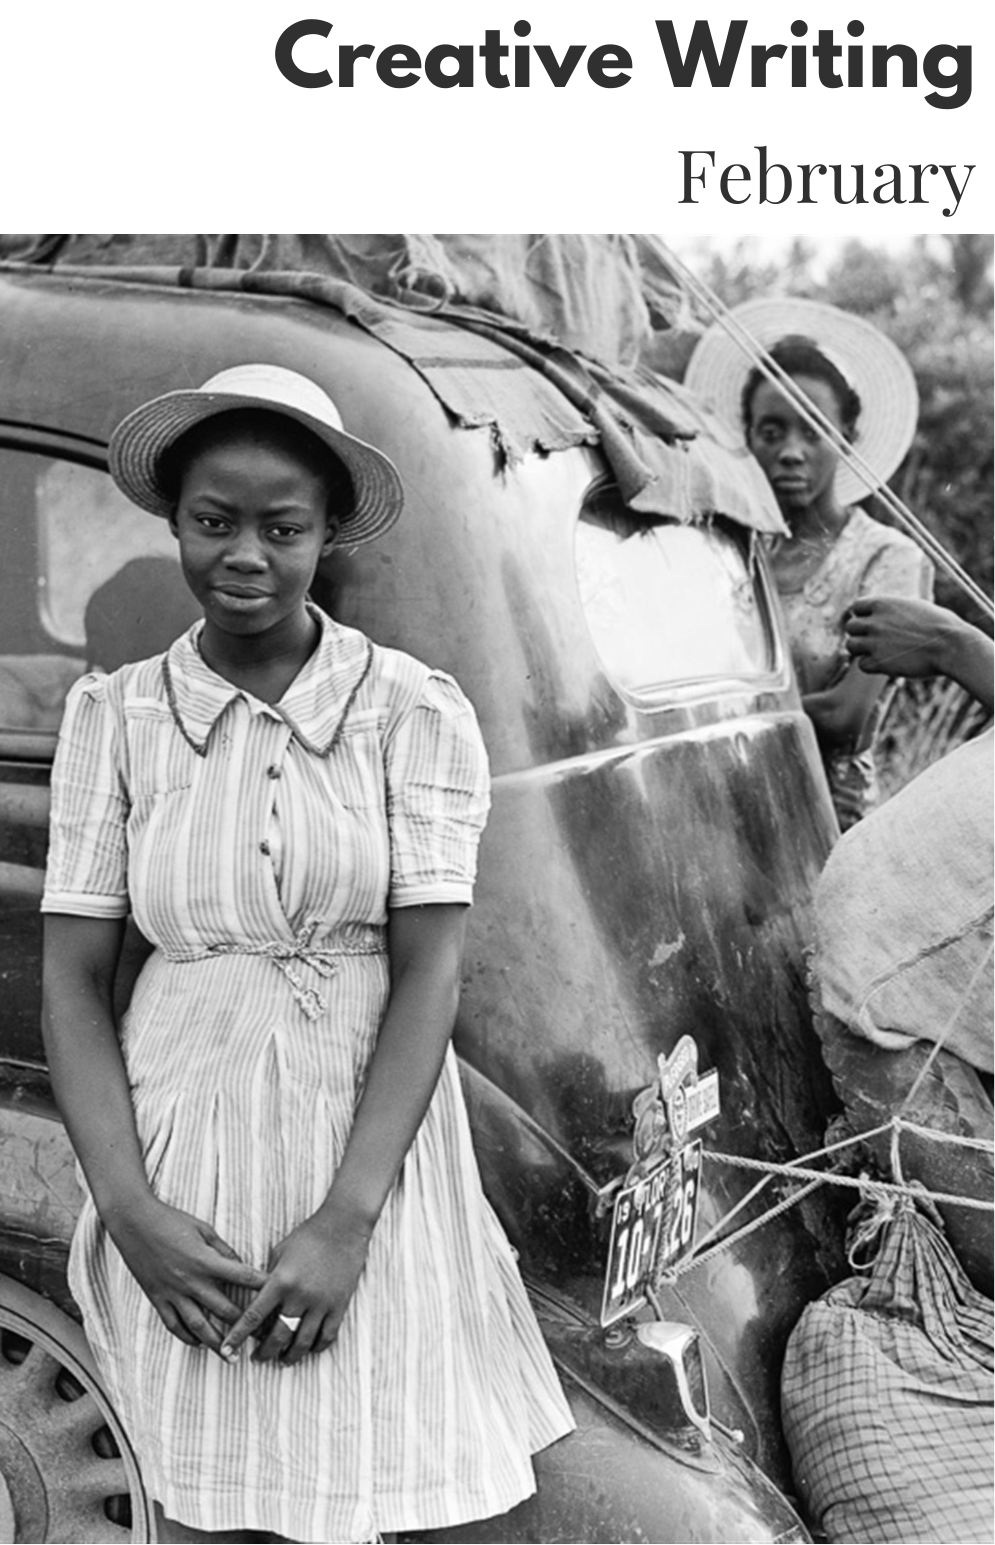 Cover of chapbook featuring a black and white photo of a Black woman standing on the side of an old car that's loaded up with luggage. 